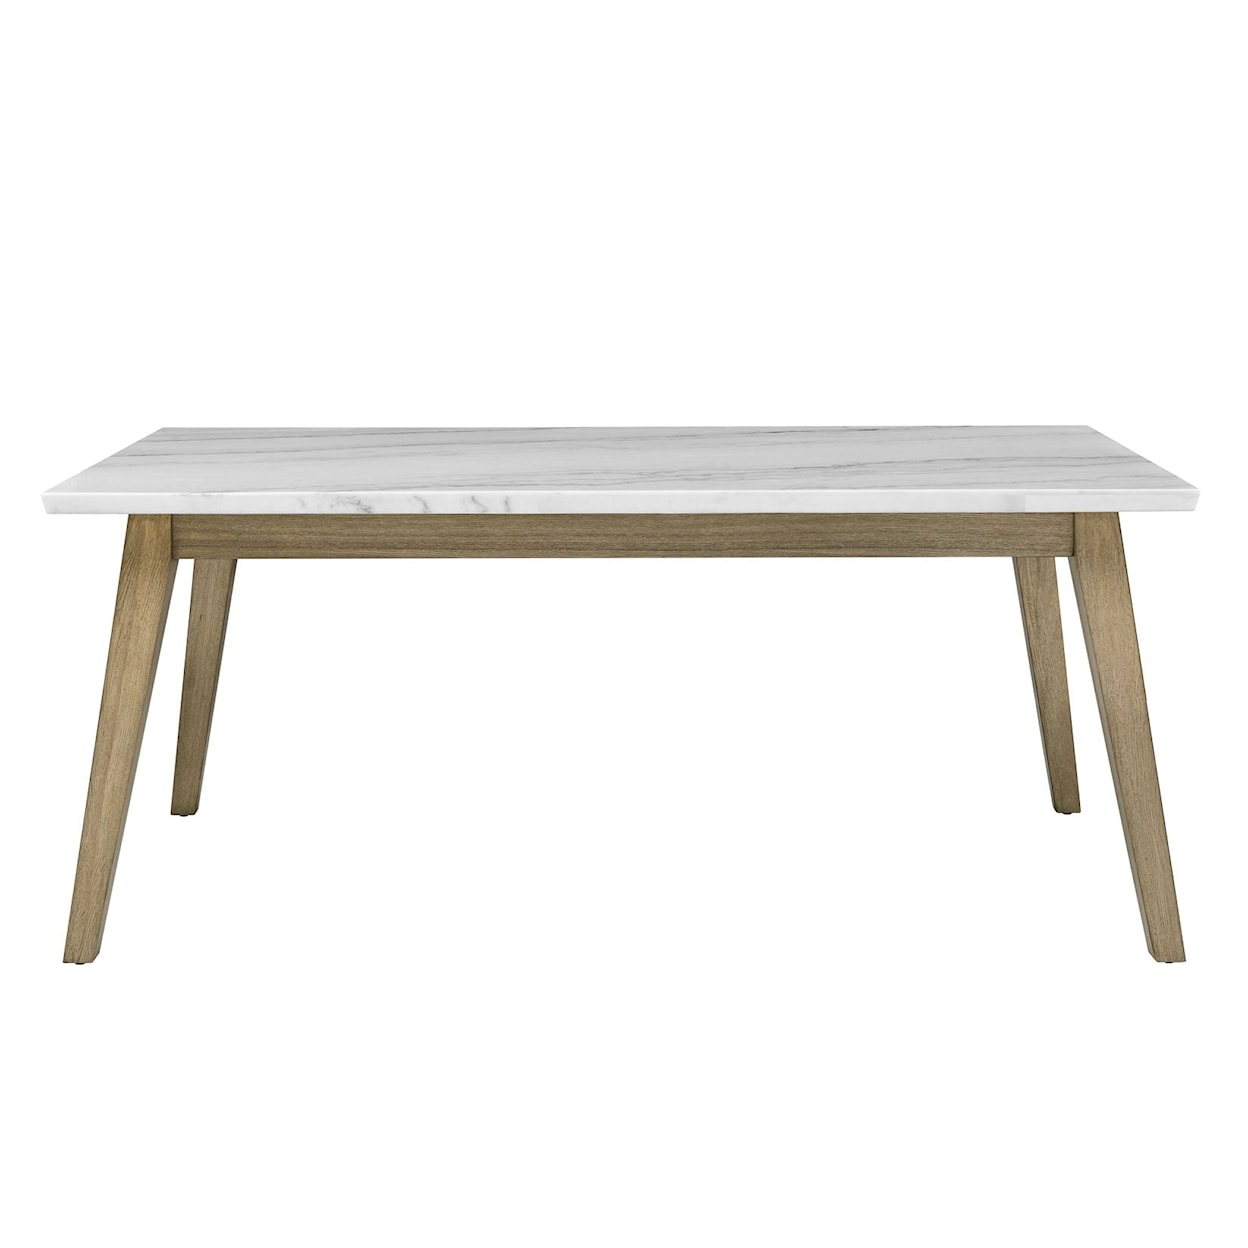 Belfort Essentials Norwood White Marble Top Dining Table